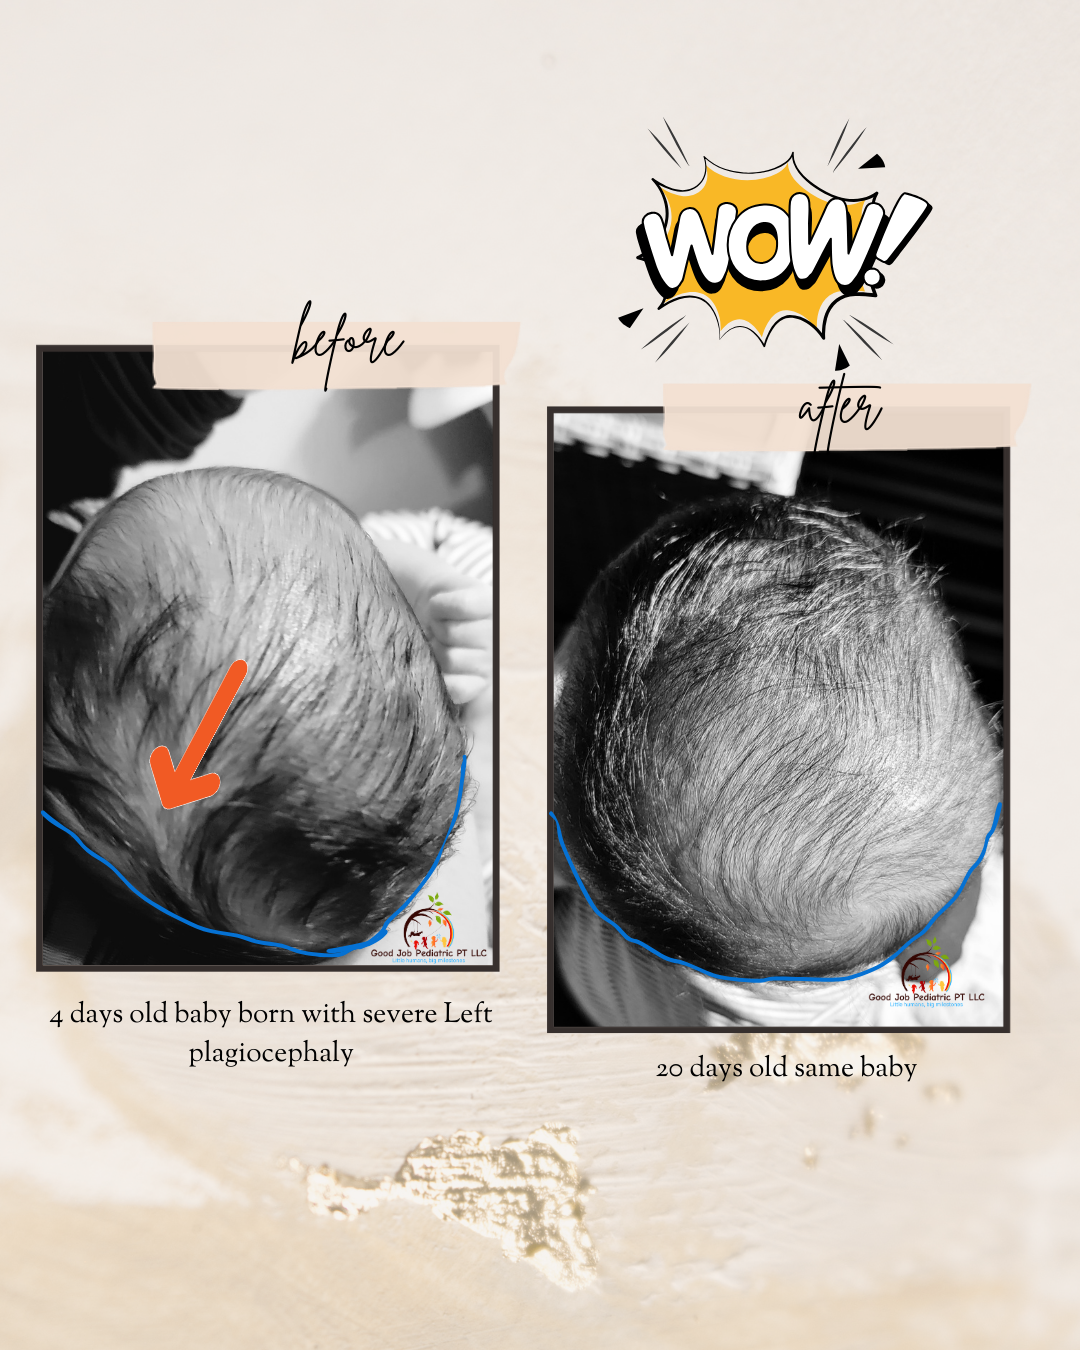 flathead/ plagiocephaly correction, without helmet before and after in a 4 day old baby